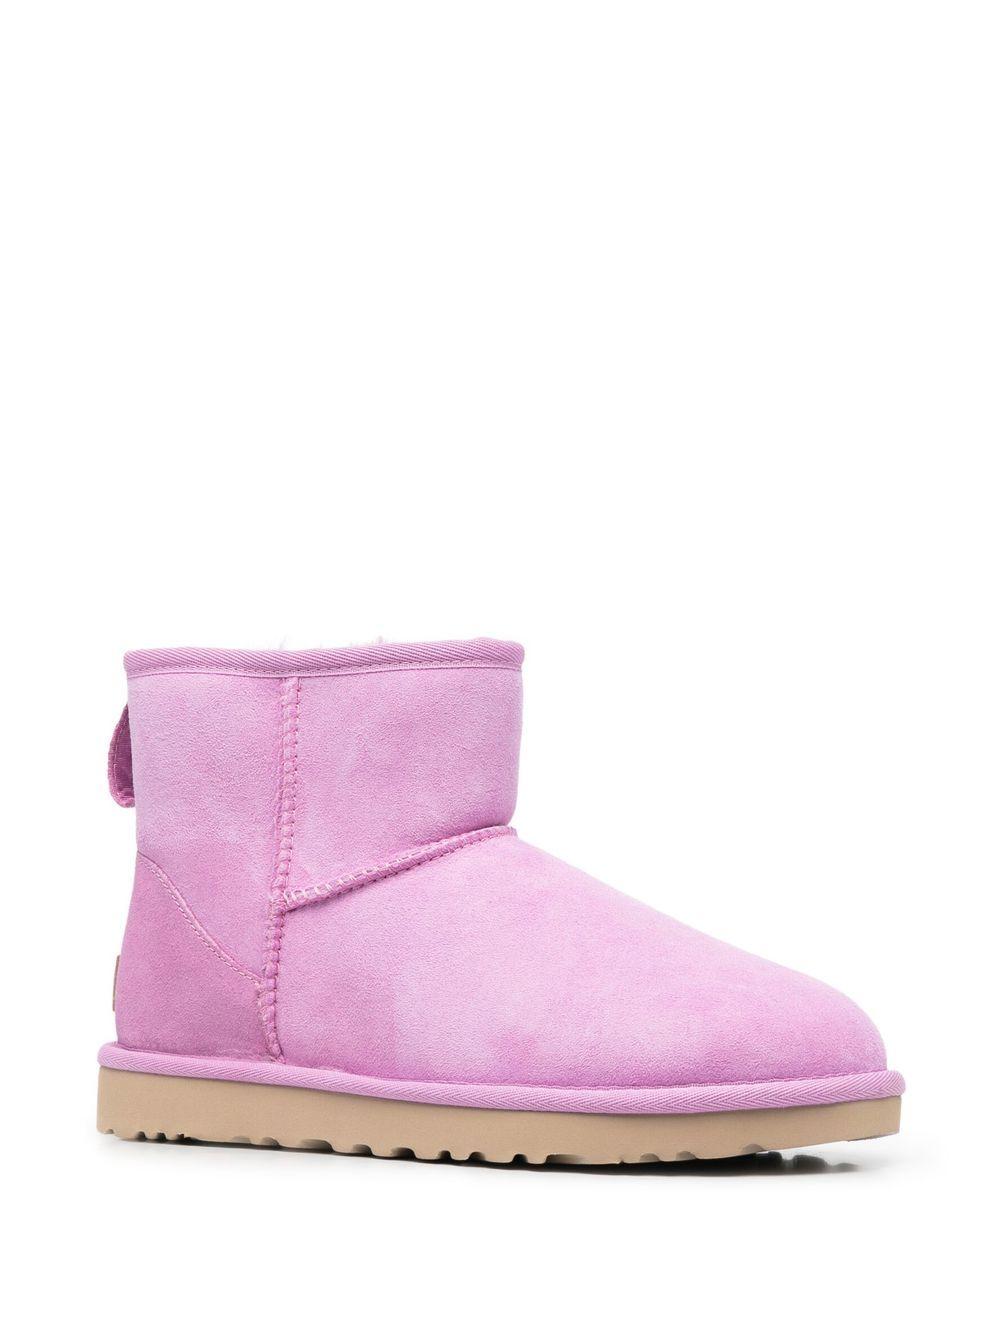 UGG Suede Classic Mini Ii Boots in Pink - Save 9% | Lyst